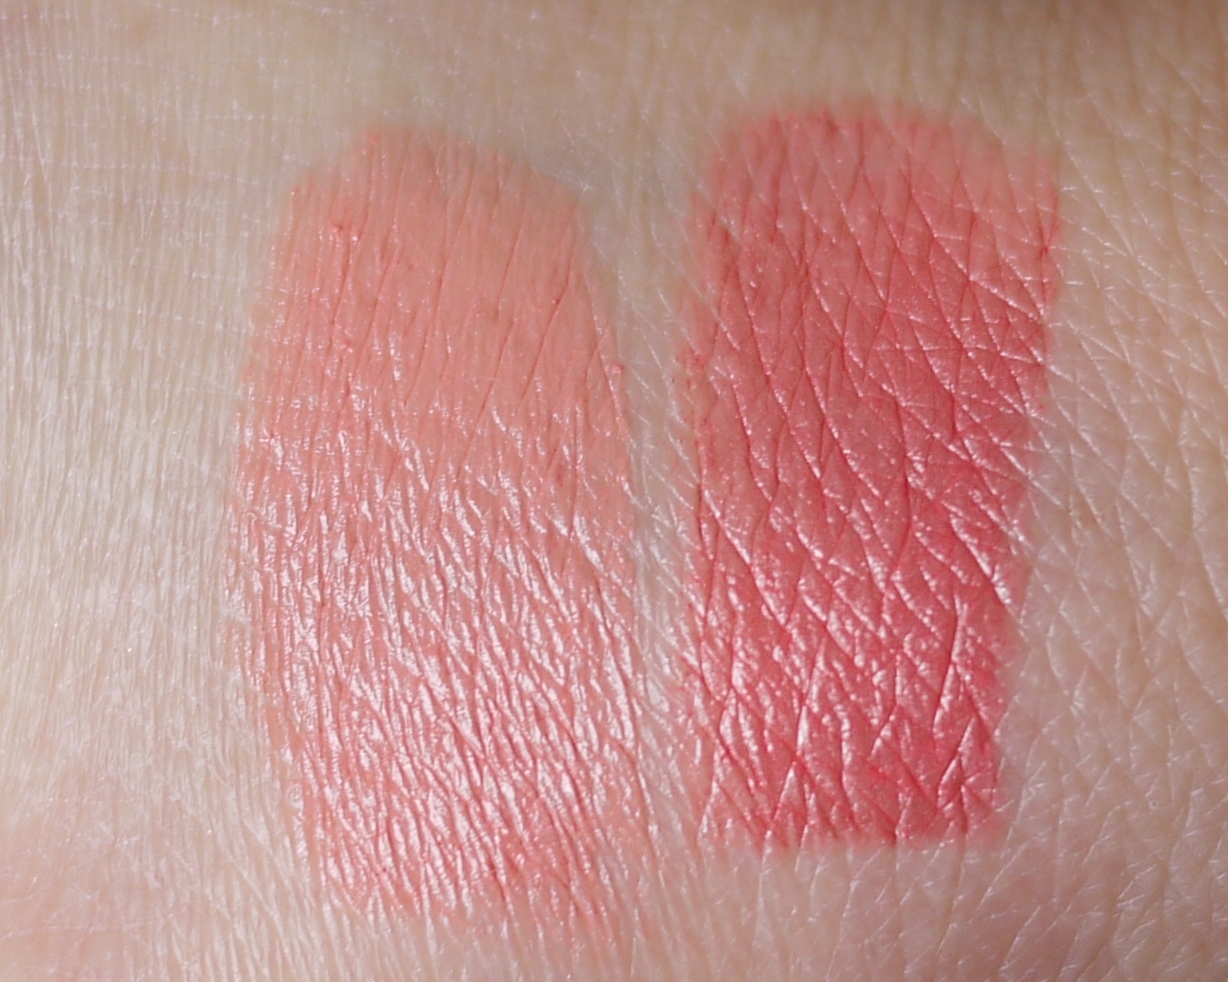 Making up 4 my age: My new Tom Ford Lip Color & Lip Color Shines (with lip  swatches)